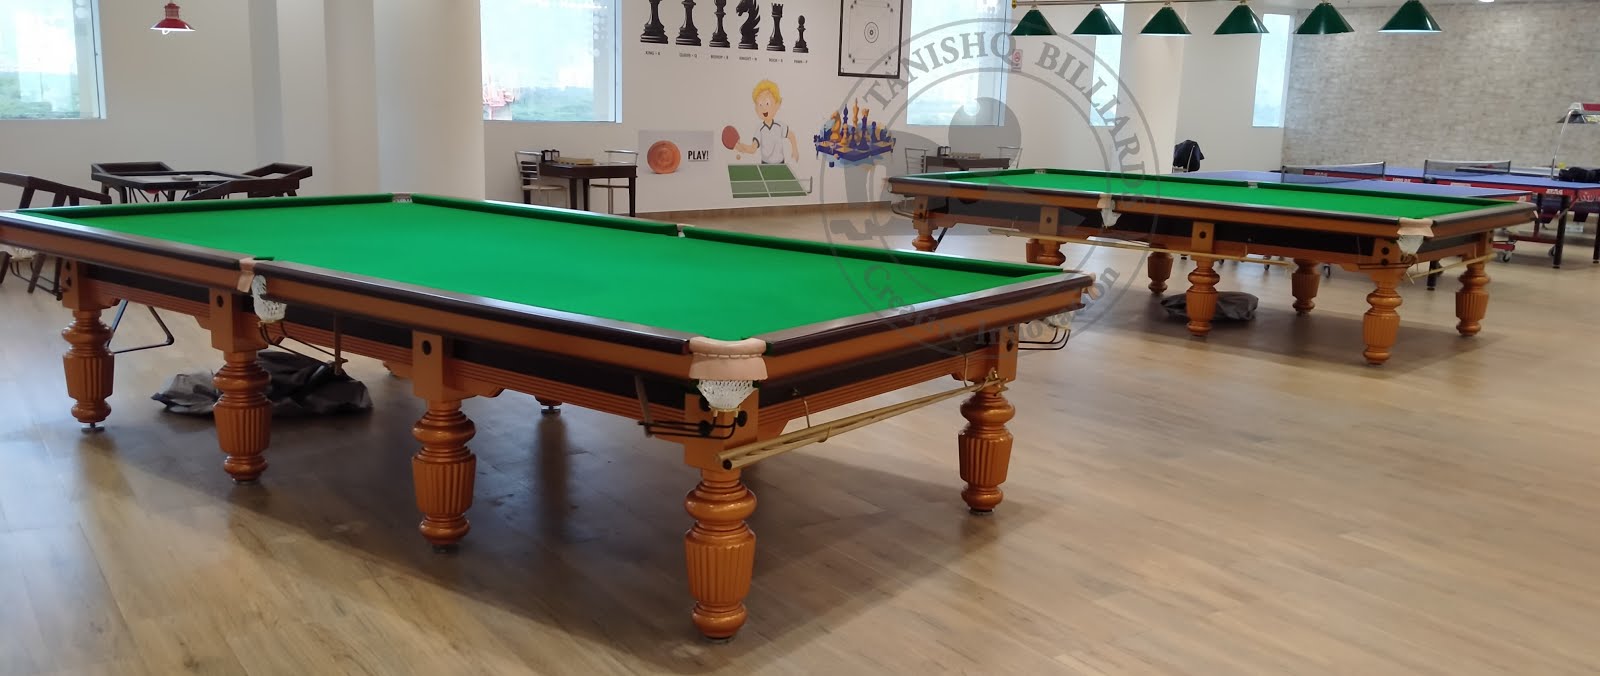 Snooker Table Steel Cushions